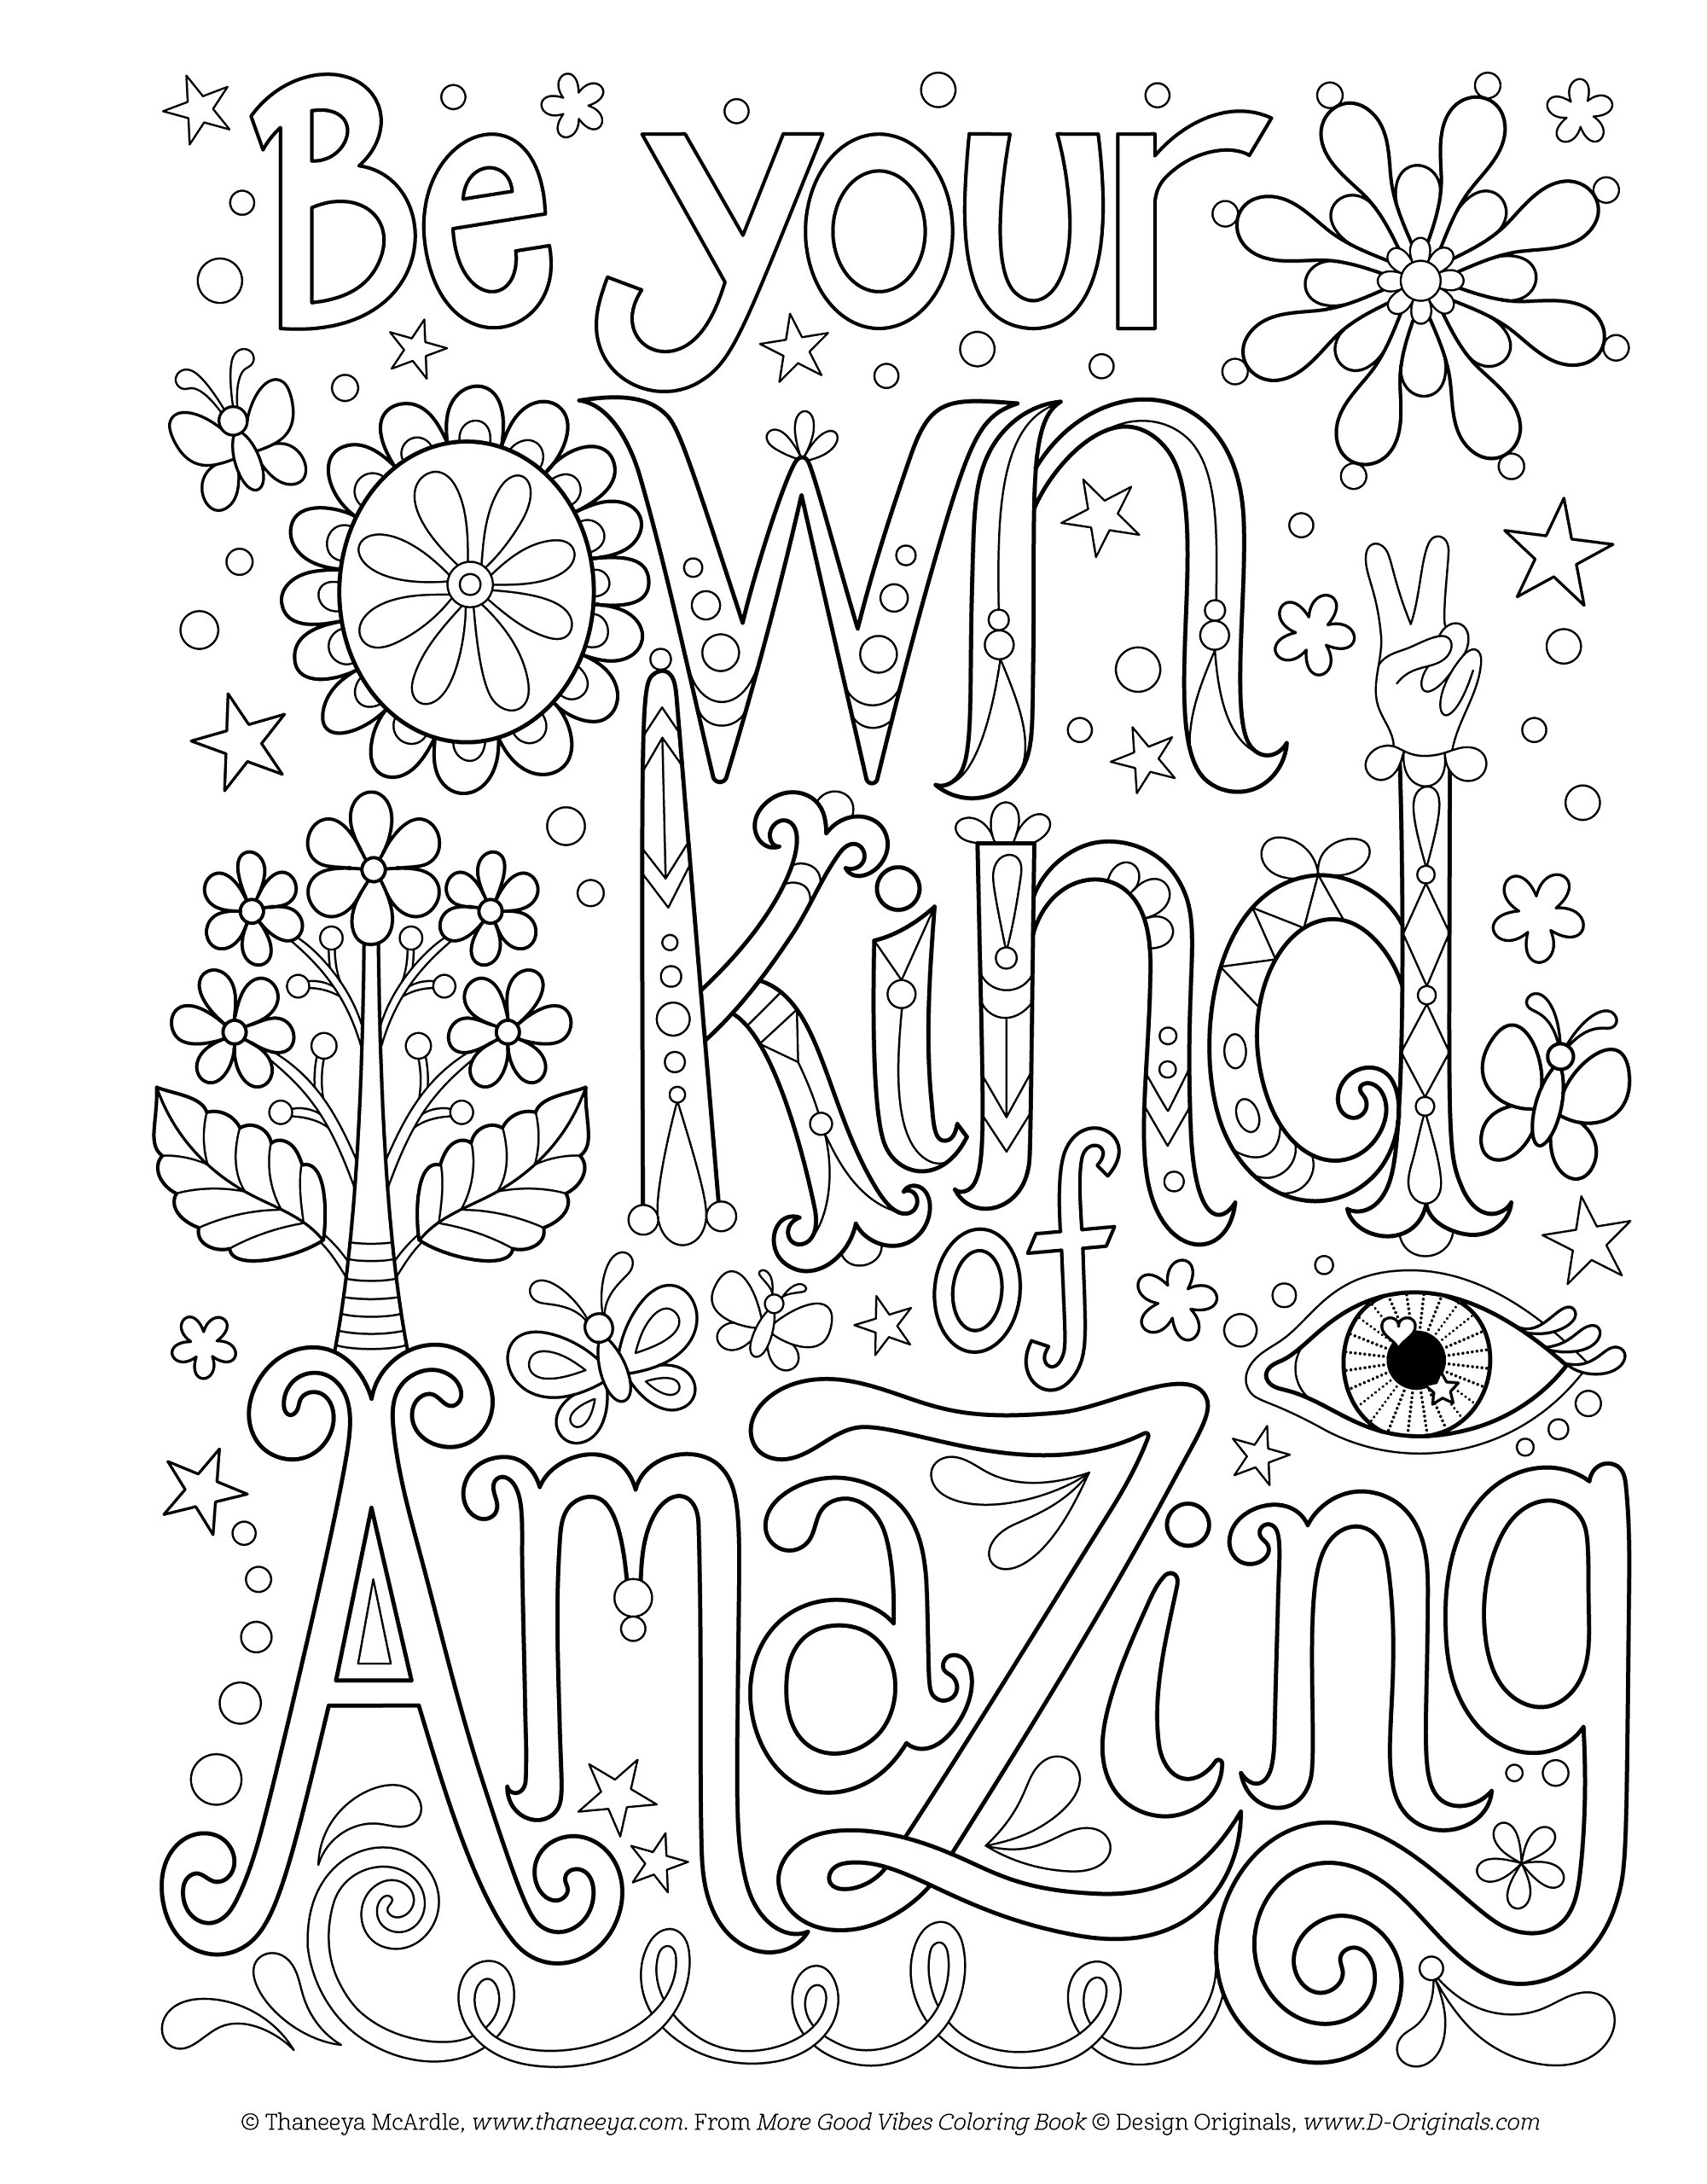 Amazon.com: More Good Vibes Coloring Book (Coloring is Fun) (Design  Originals) 32 Beginner-Friendly Uplifting & Creative Art Activities on  High-Quality Extra-Thick Perforated Paper that Resists Bleed Through:  0023863057417: McArdle, Thaneeya: Books